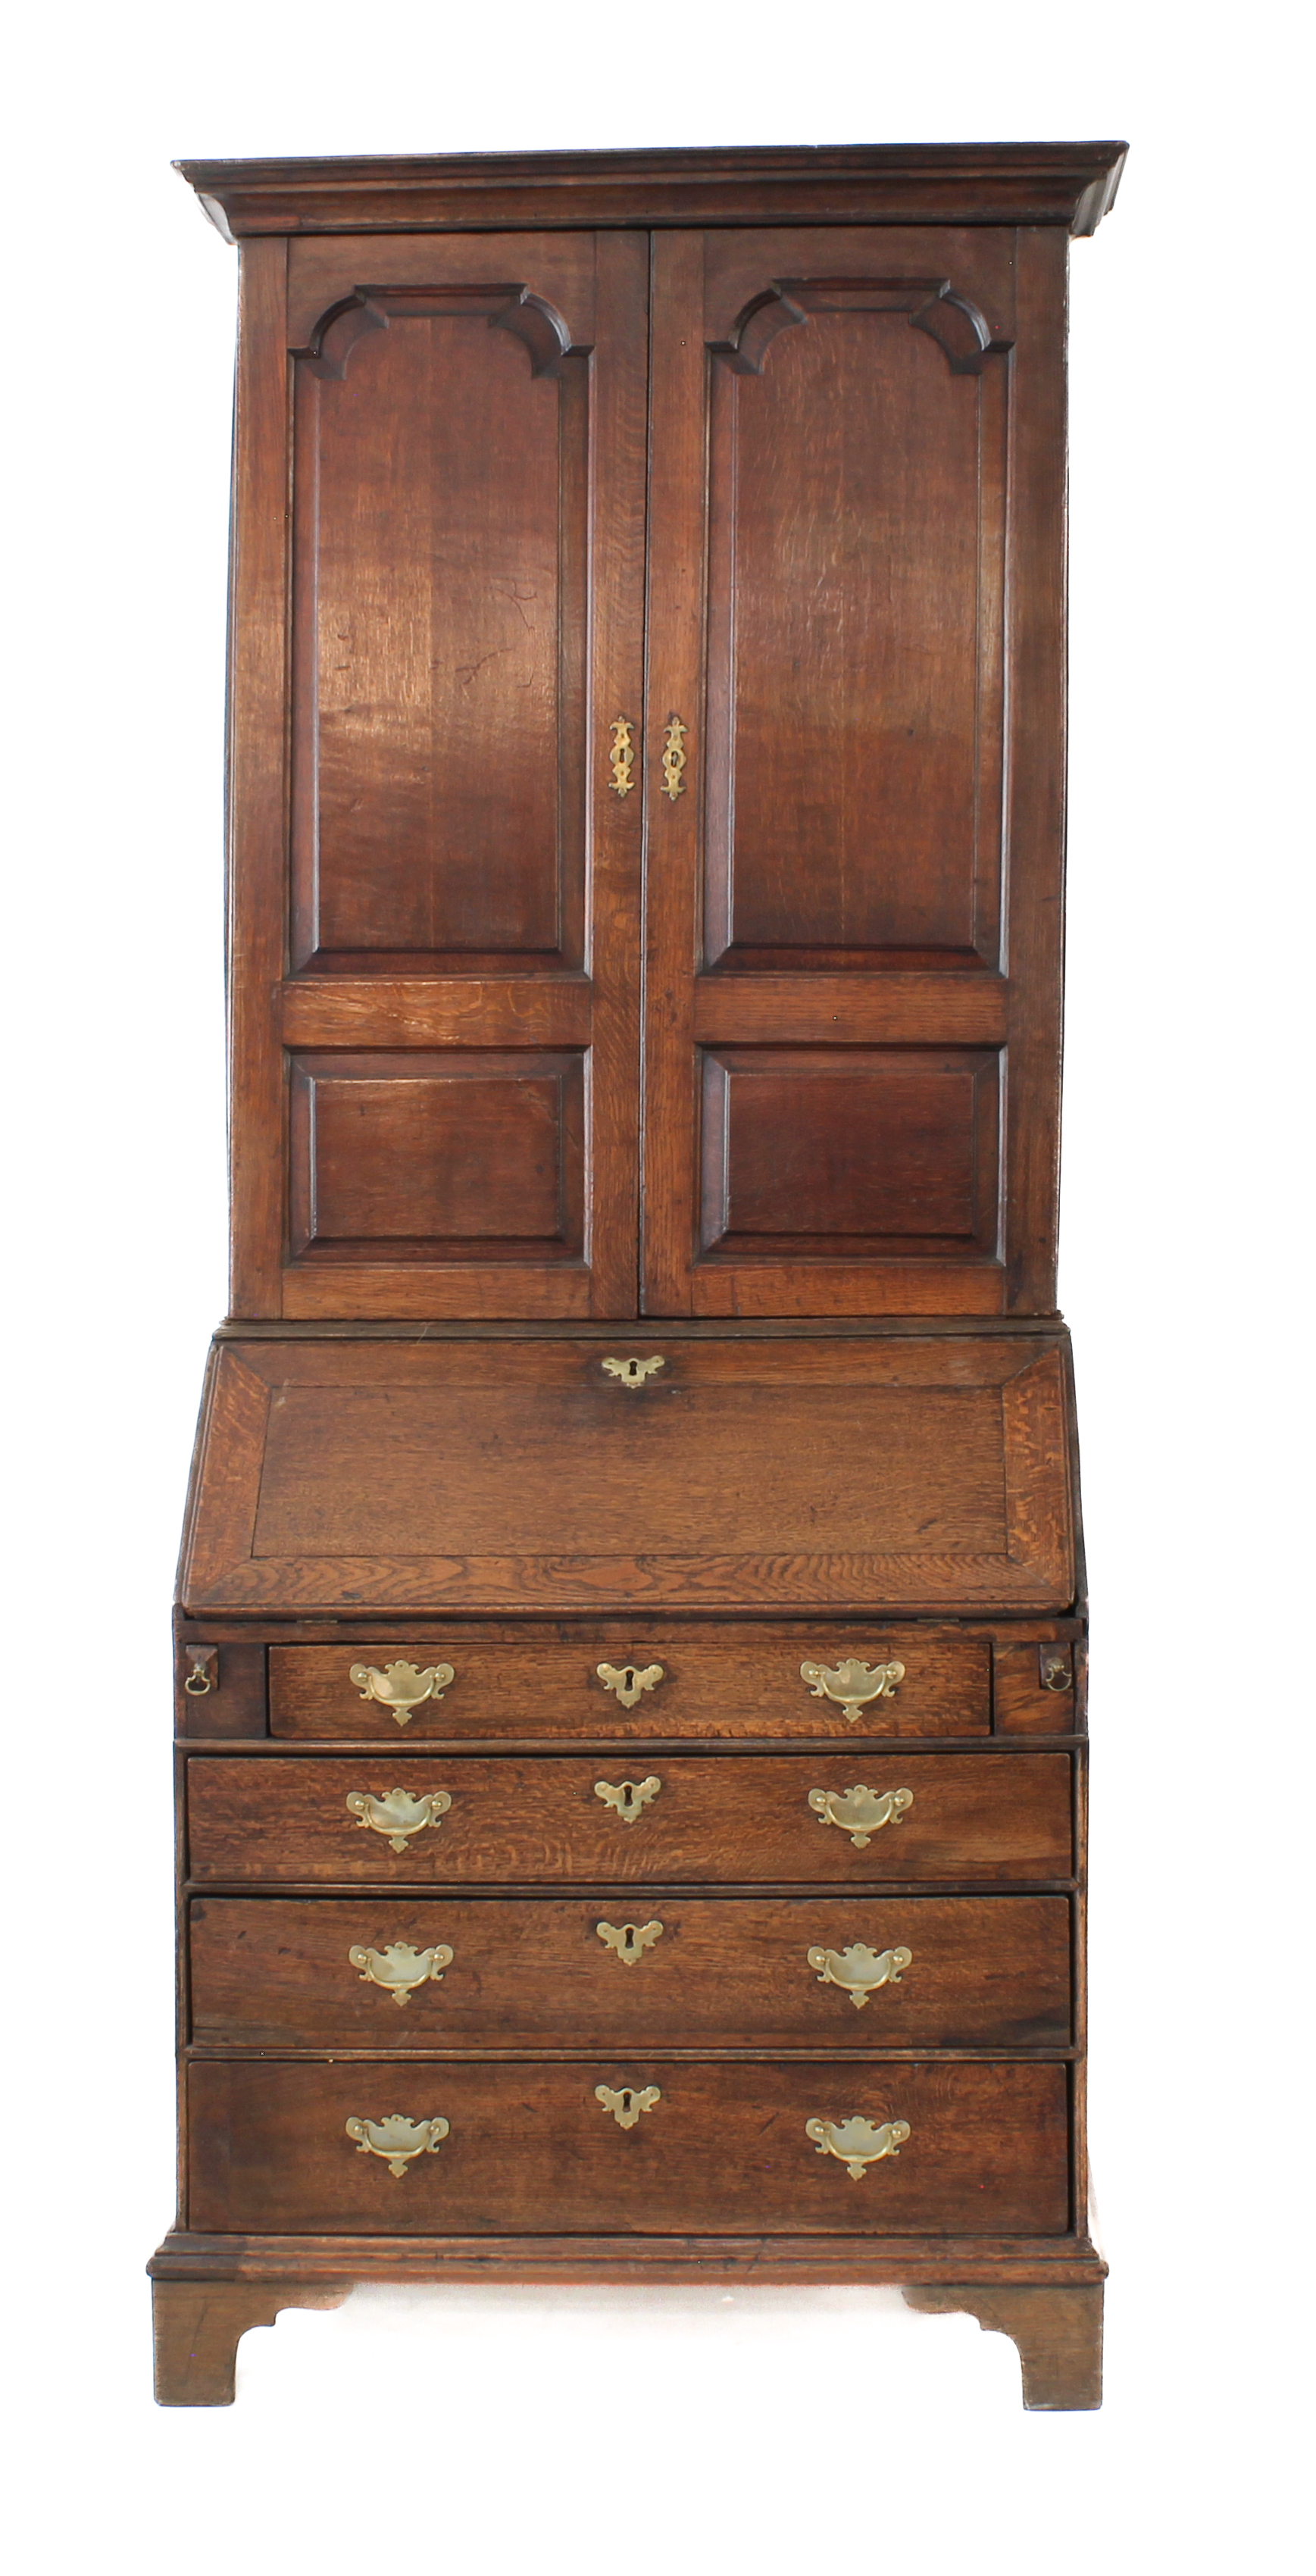 A mid-18th century oak bureau-cabinet: two high fielded panel doors opening to reveal shelves; - Image 2 of 6